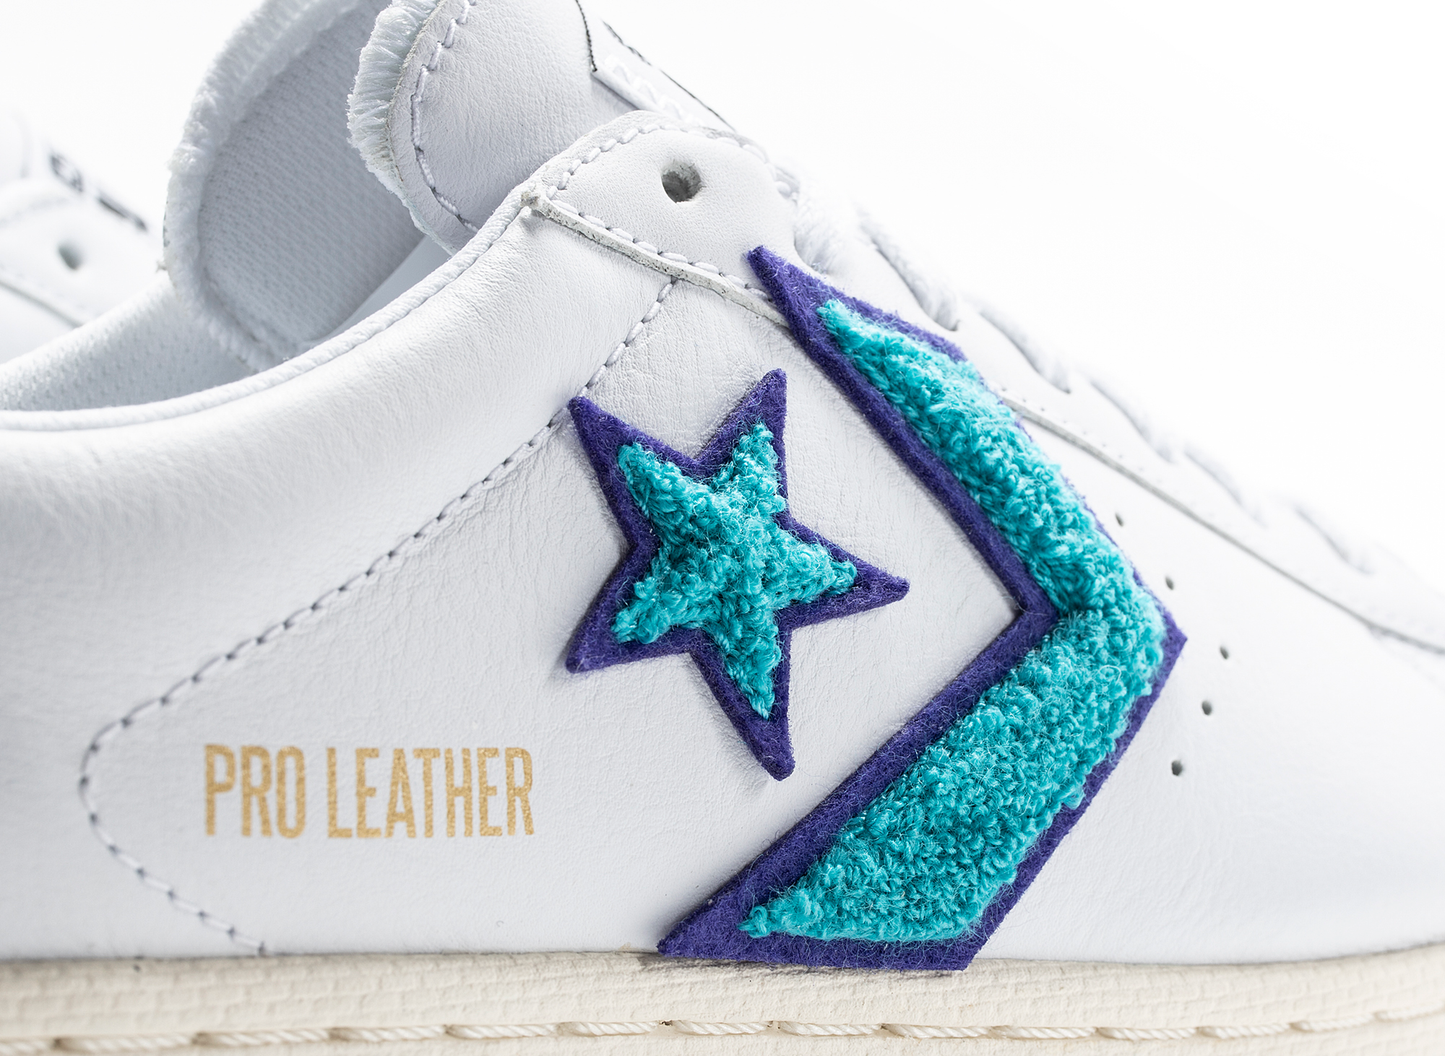 Converse Pro Leather Ox